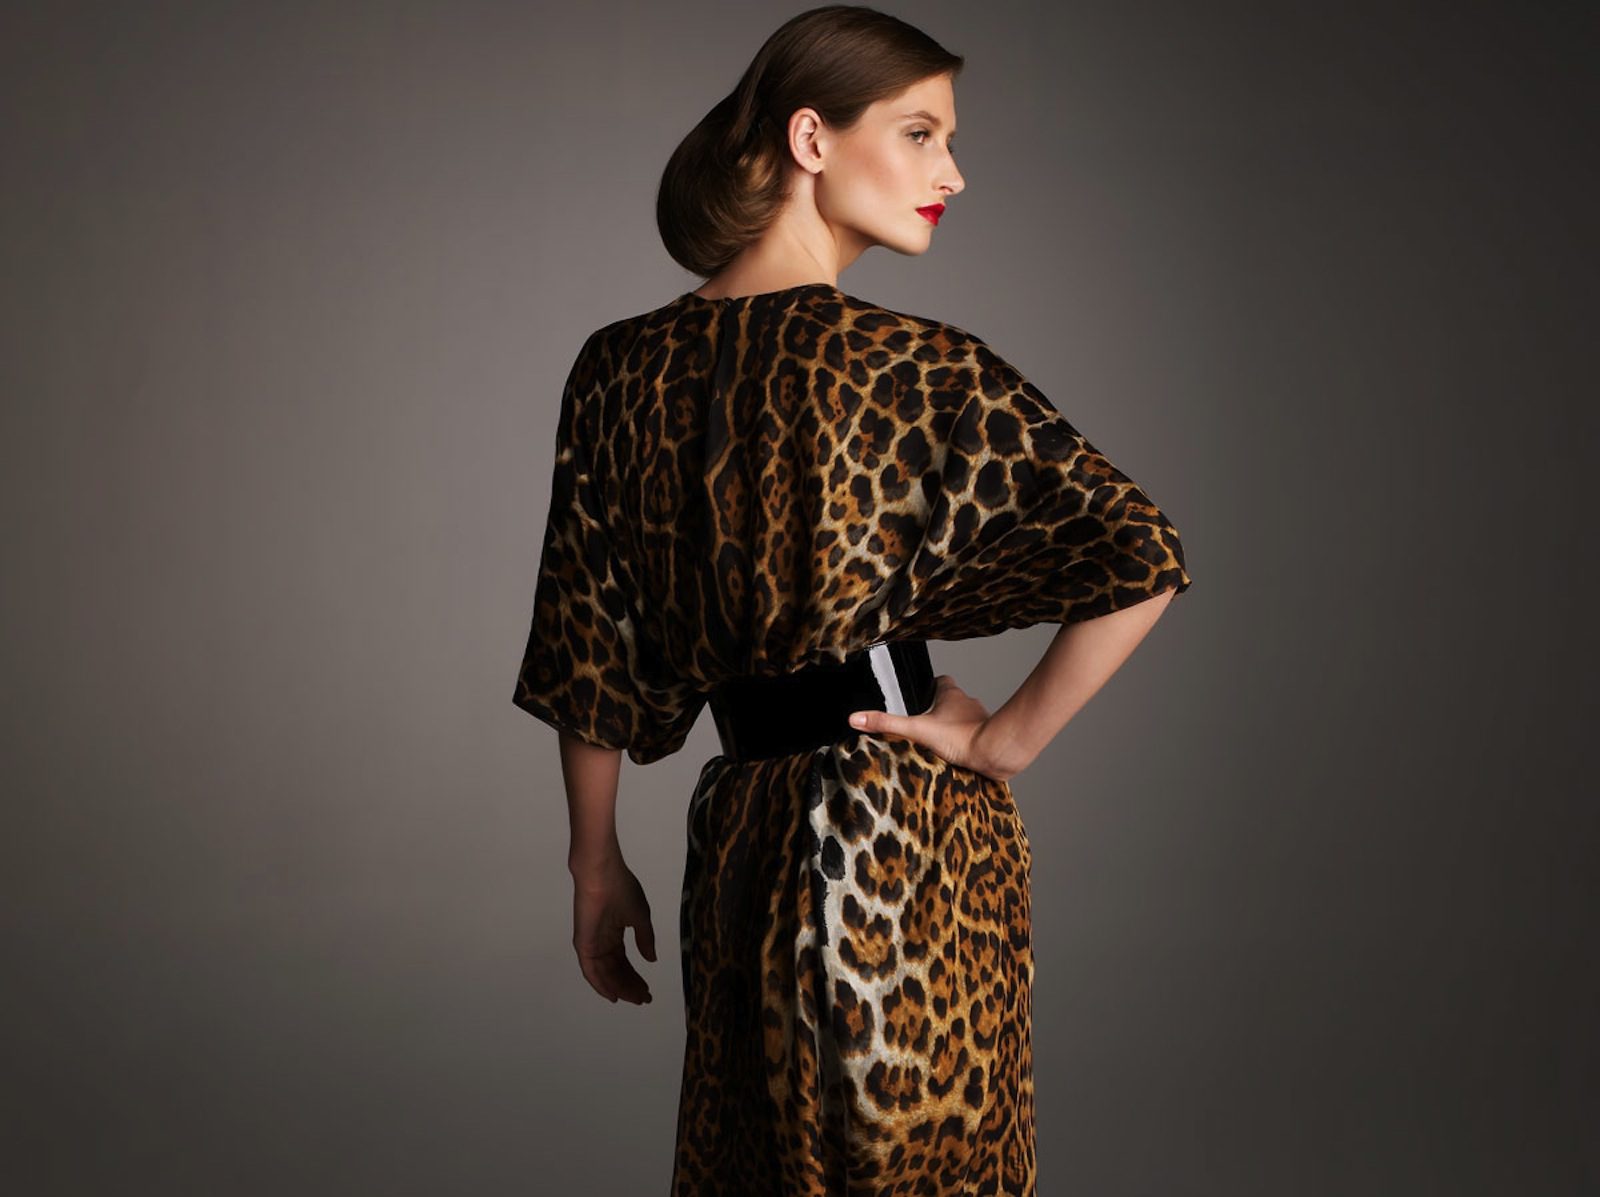 The Indispensable: Leopard Print #3